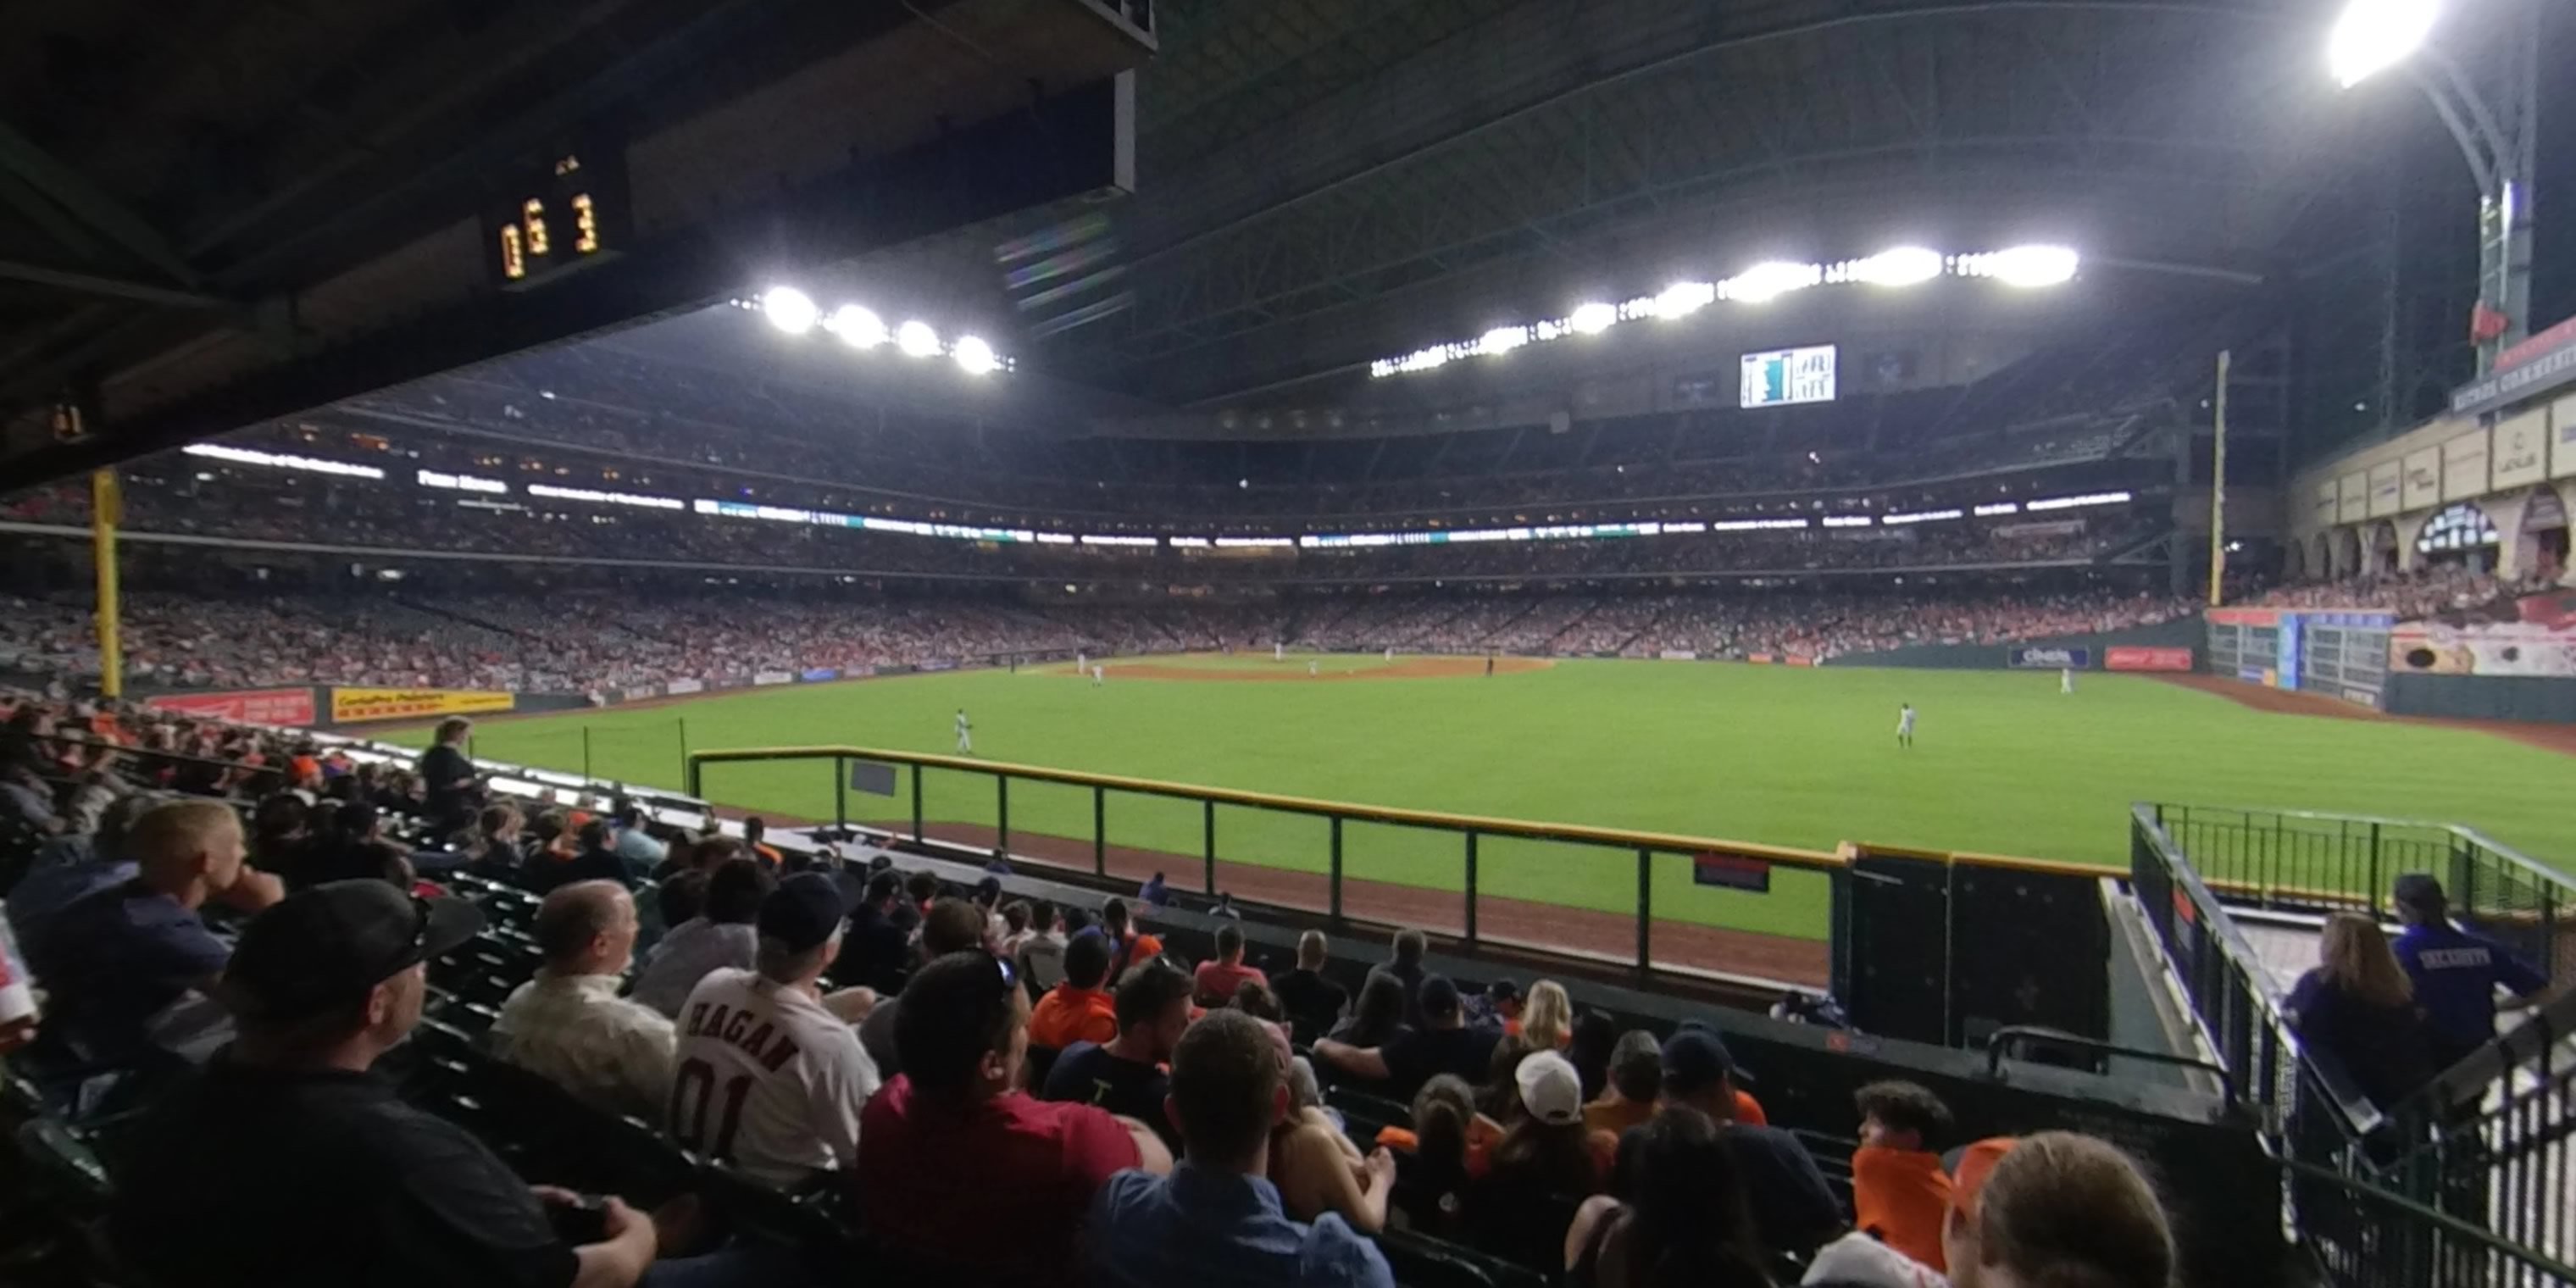 section 156 panoramic seat view  for baseball - minute maid park